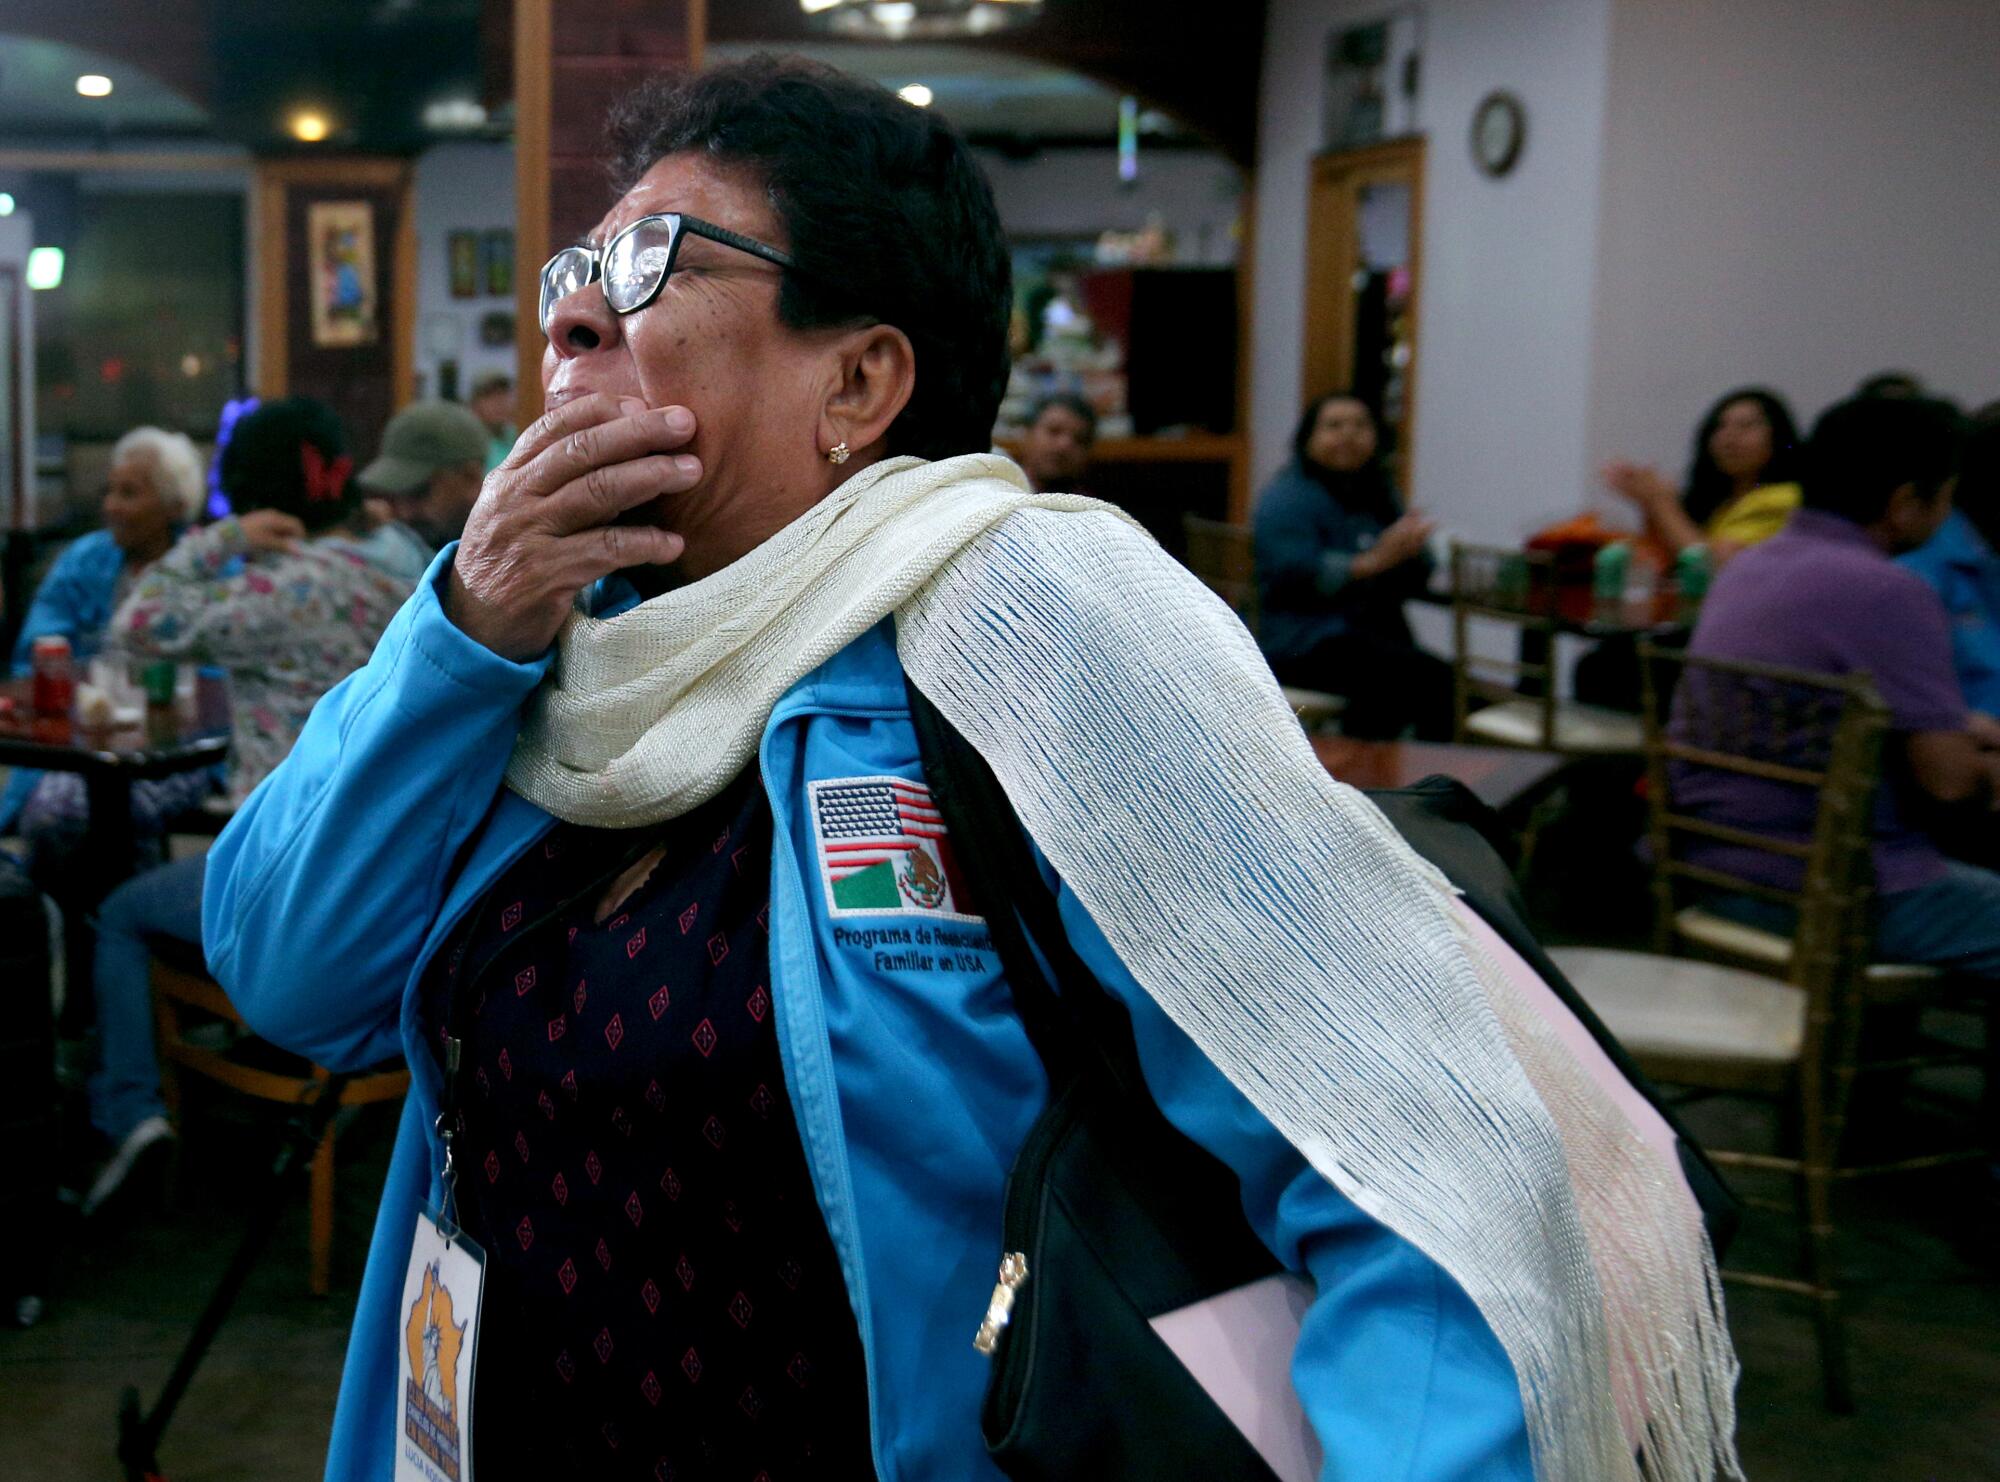 Filled with emotions, 63-year-old Lucia Rodriguez Adrian, hand over her mouth, walks to meet her children